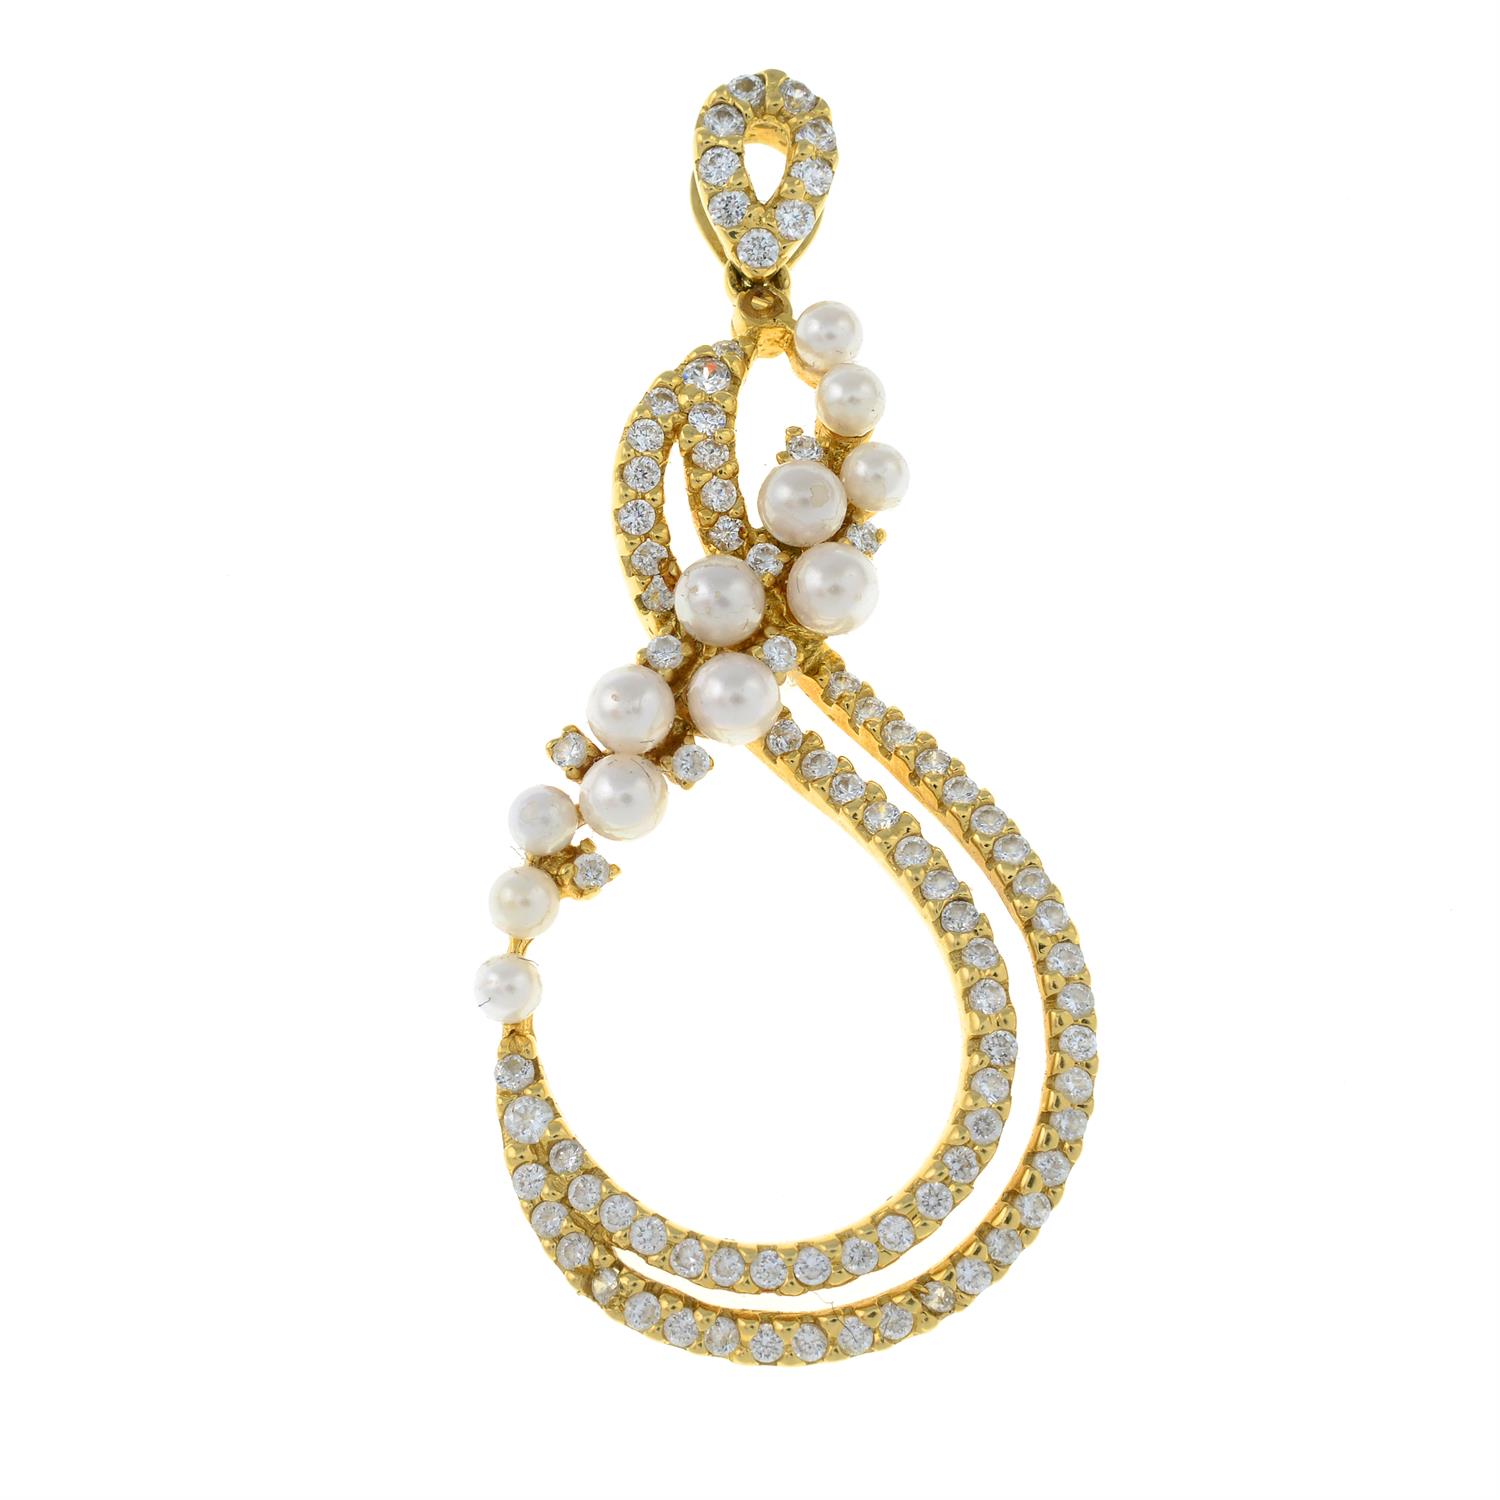 A cubic zirconia and imitation pearl openwork pendant.